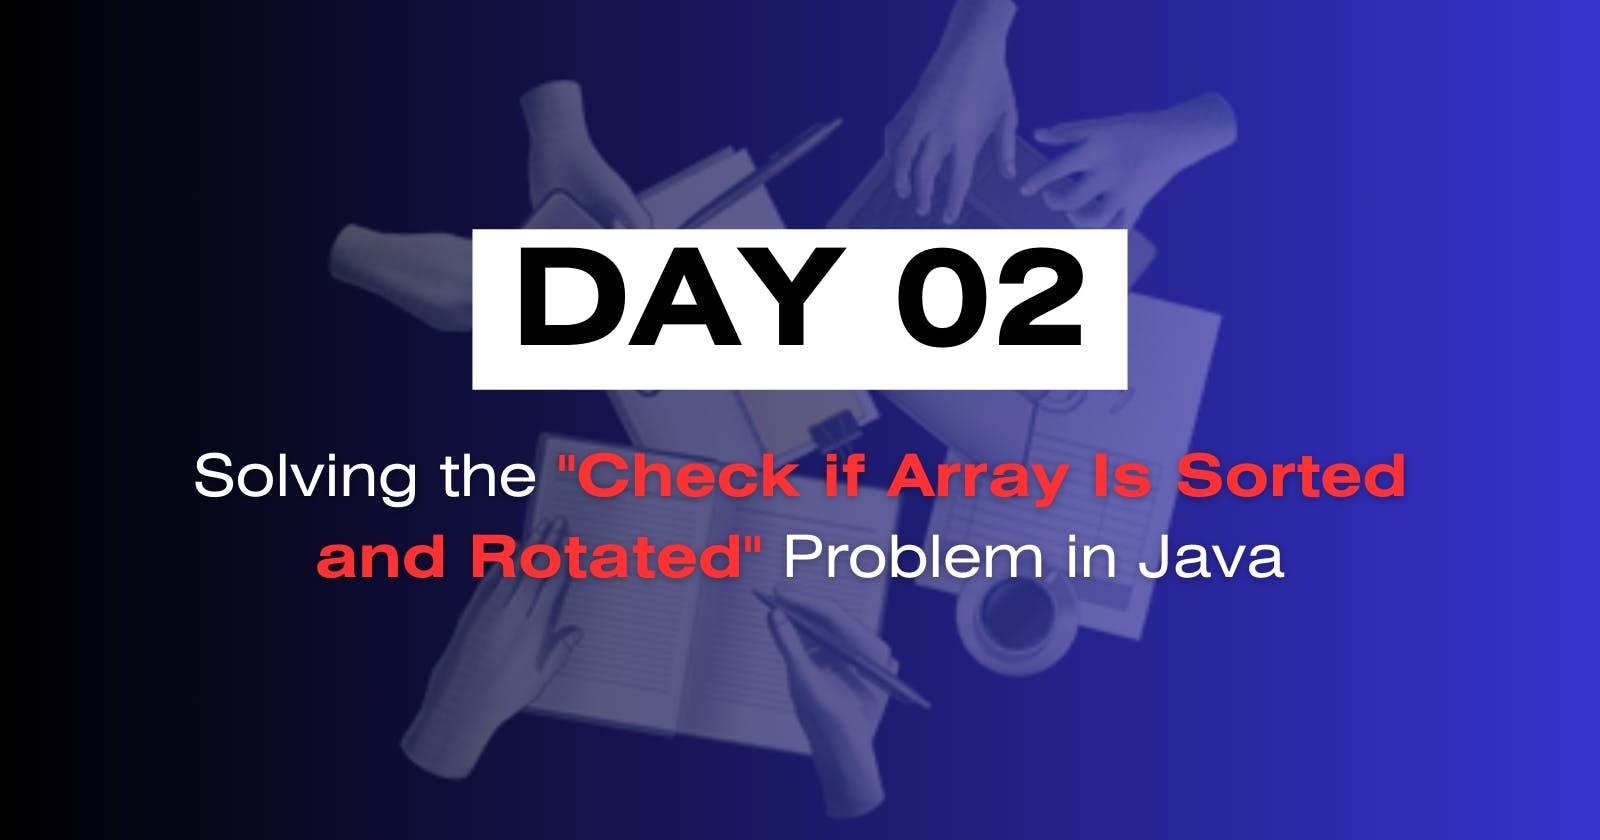 Day02 : Solving the "Check if Array Is Sorted and Rotated" Problem in Java